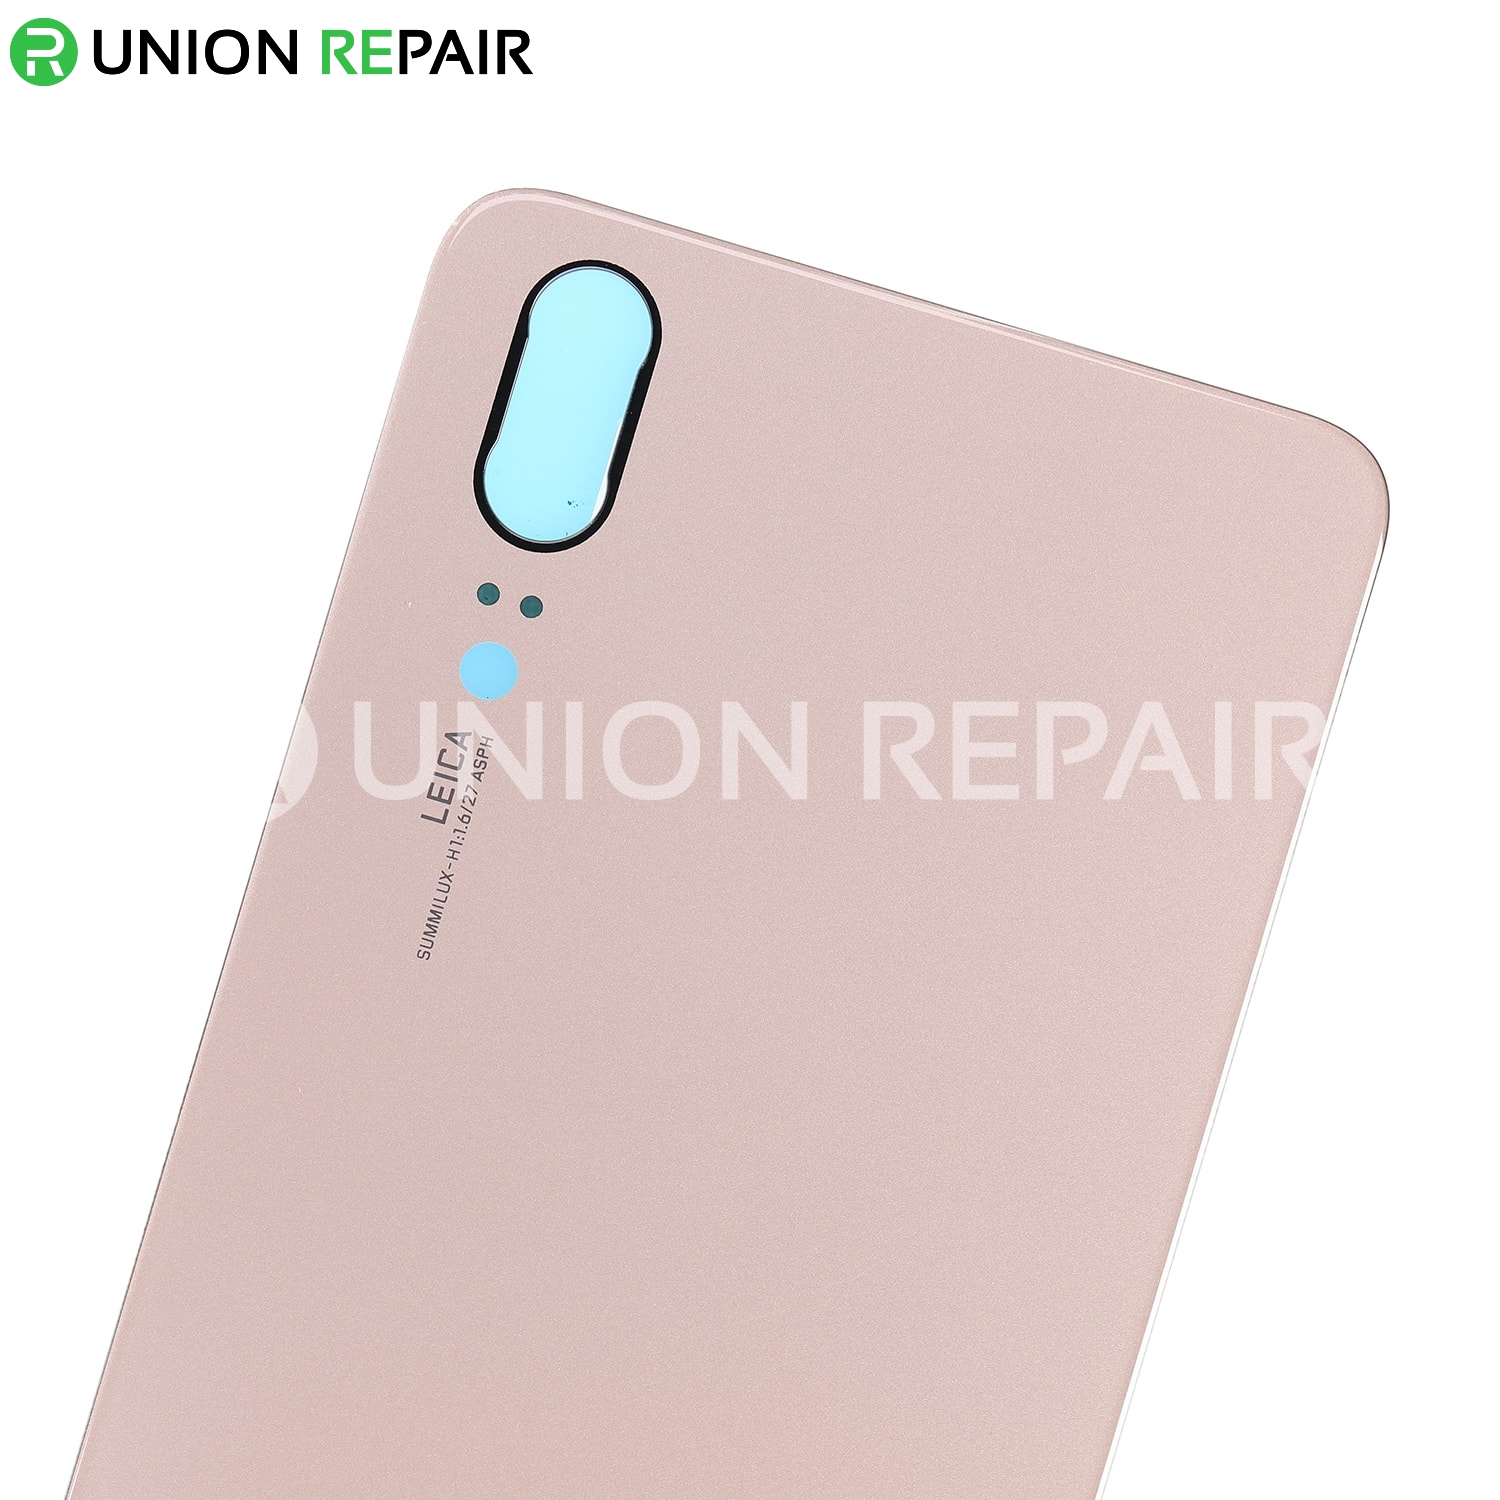 Replacement for Huawei P20 Battery Door - Gold